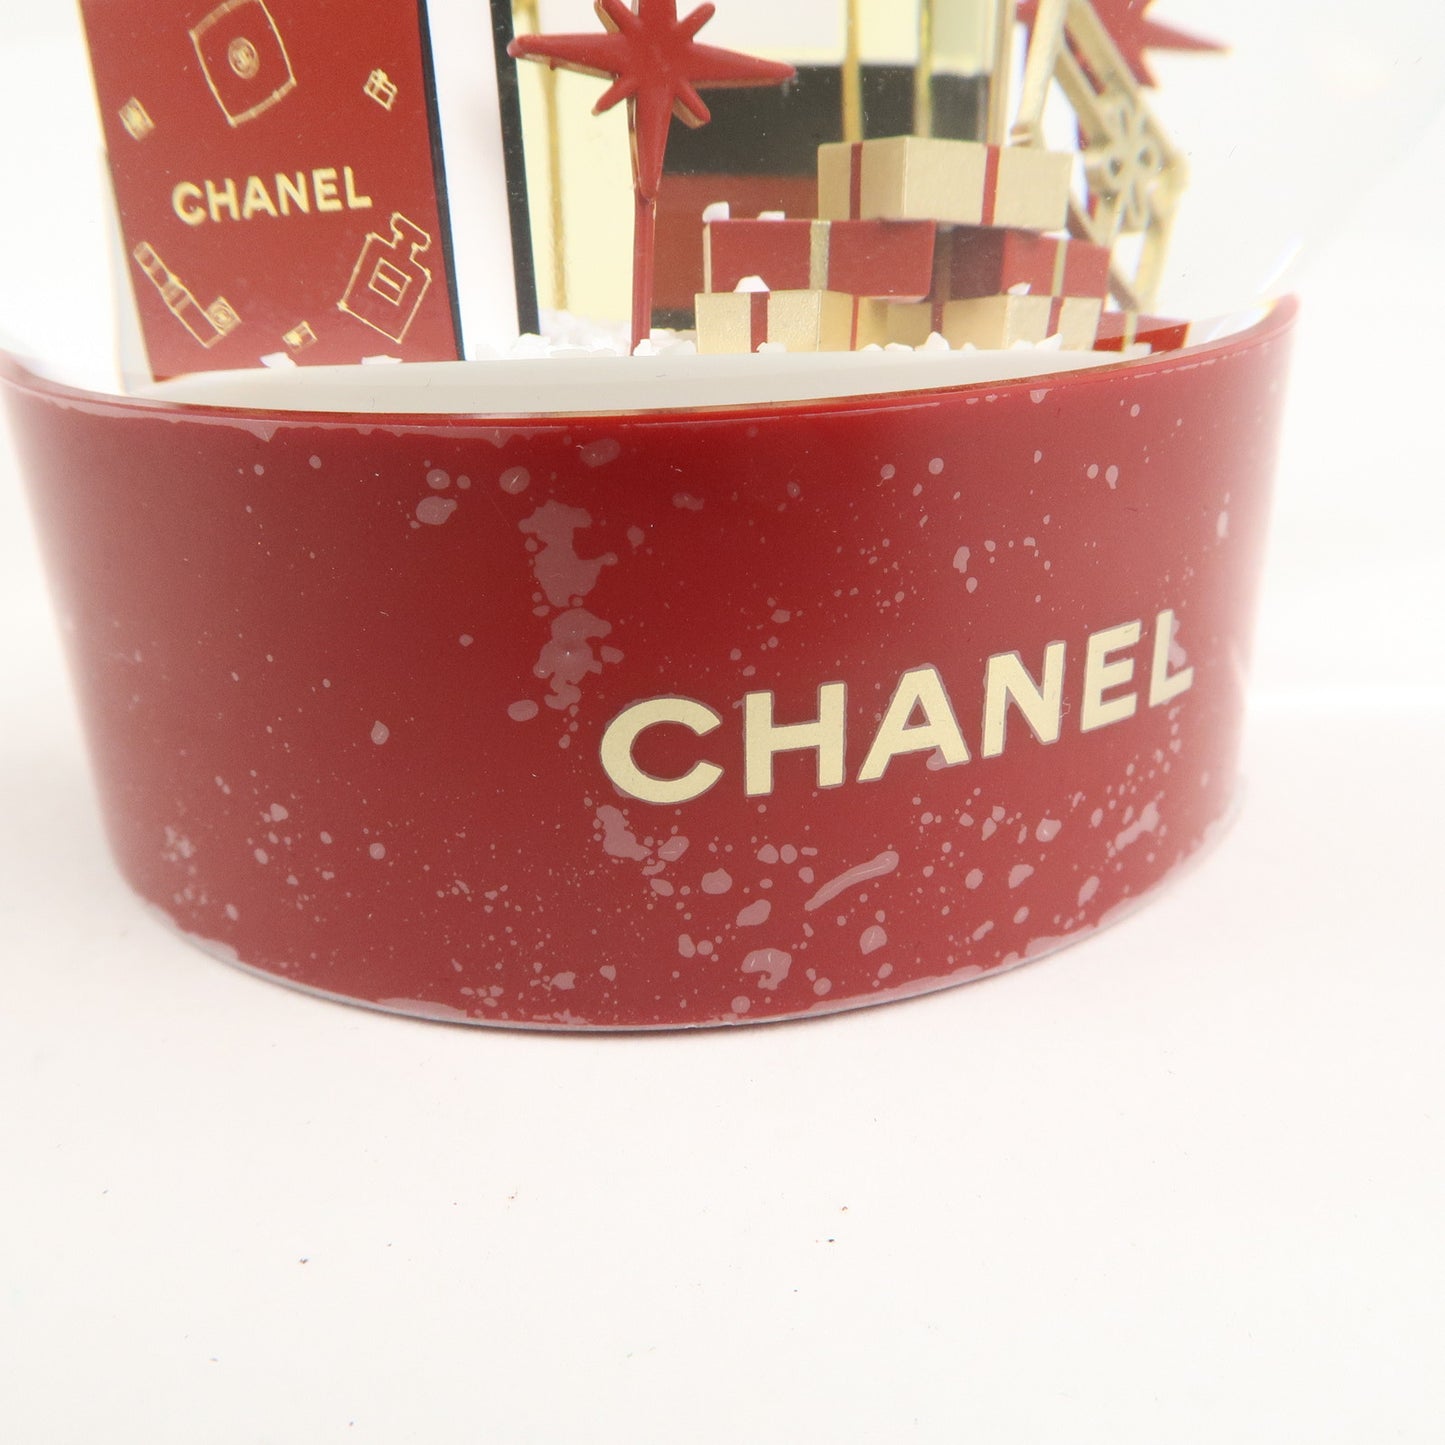 CHANEL Glass Snow Globe Snow Dome 2022 Novelty Bordeaux Red